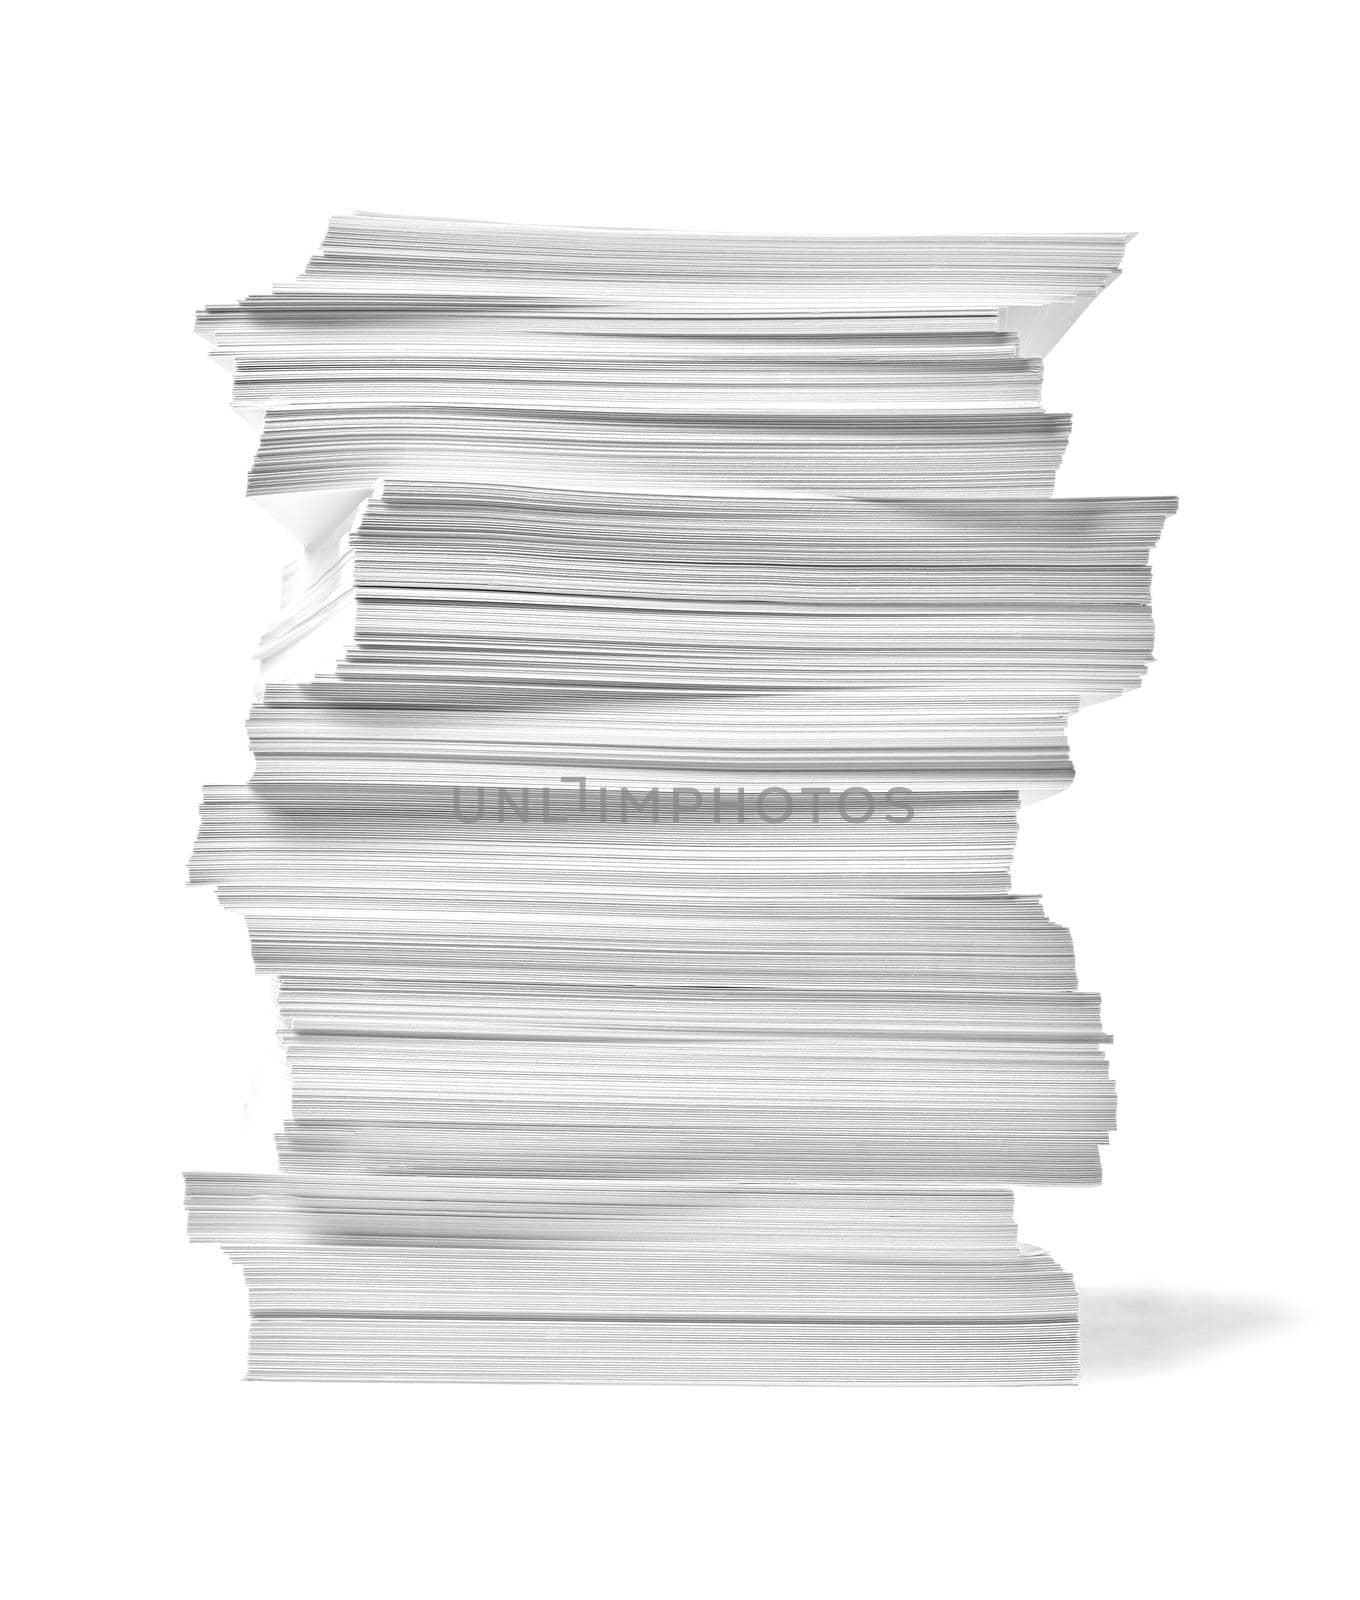 close up of a stack of paper on white background